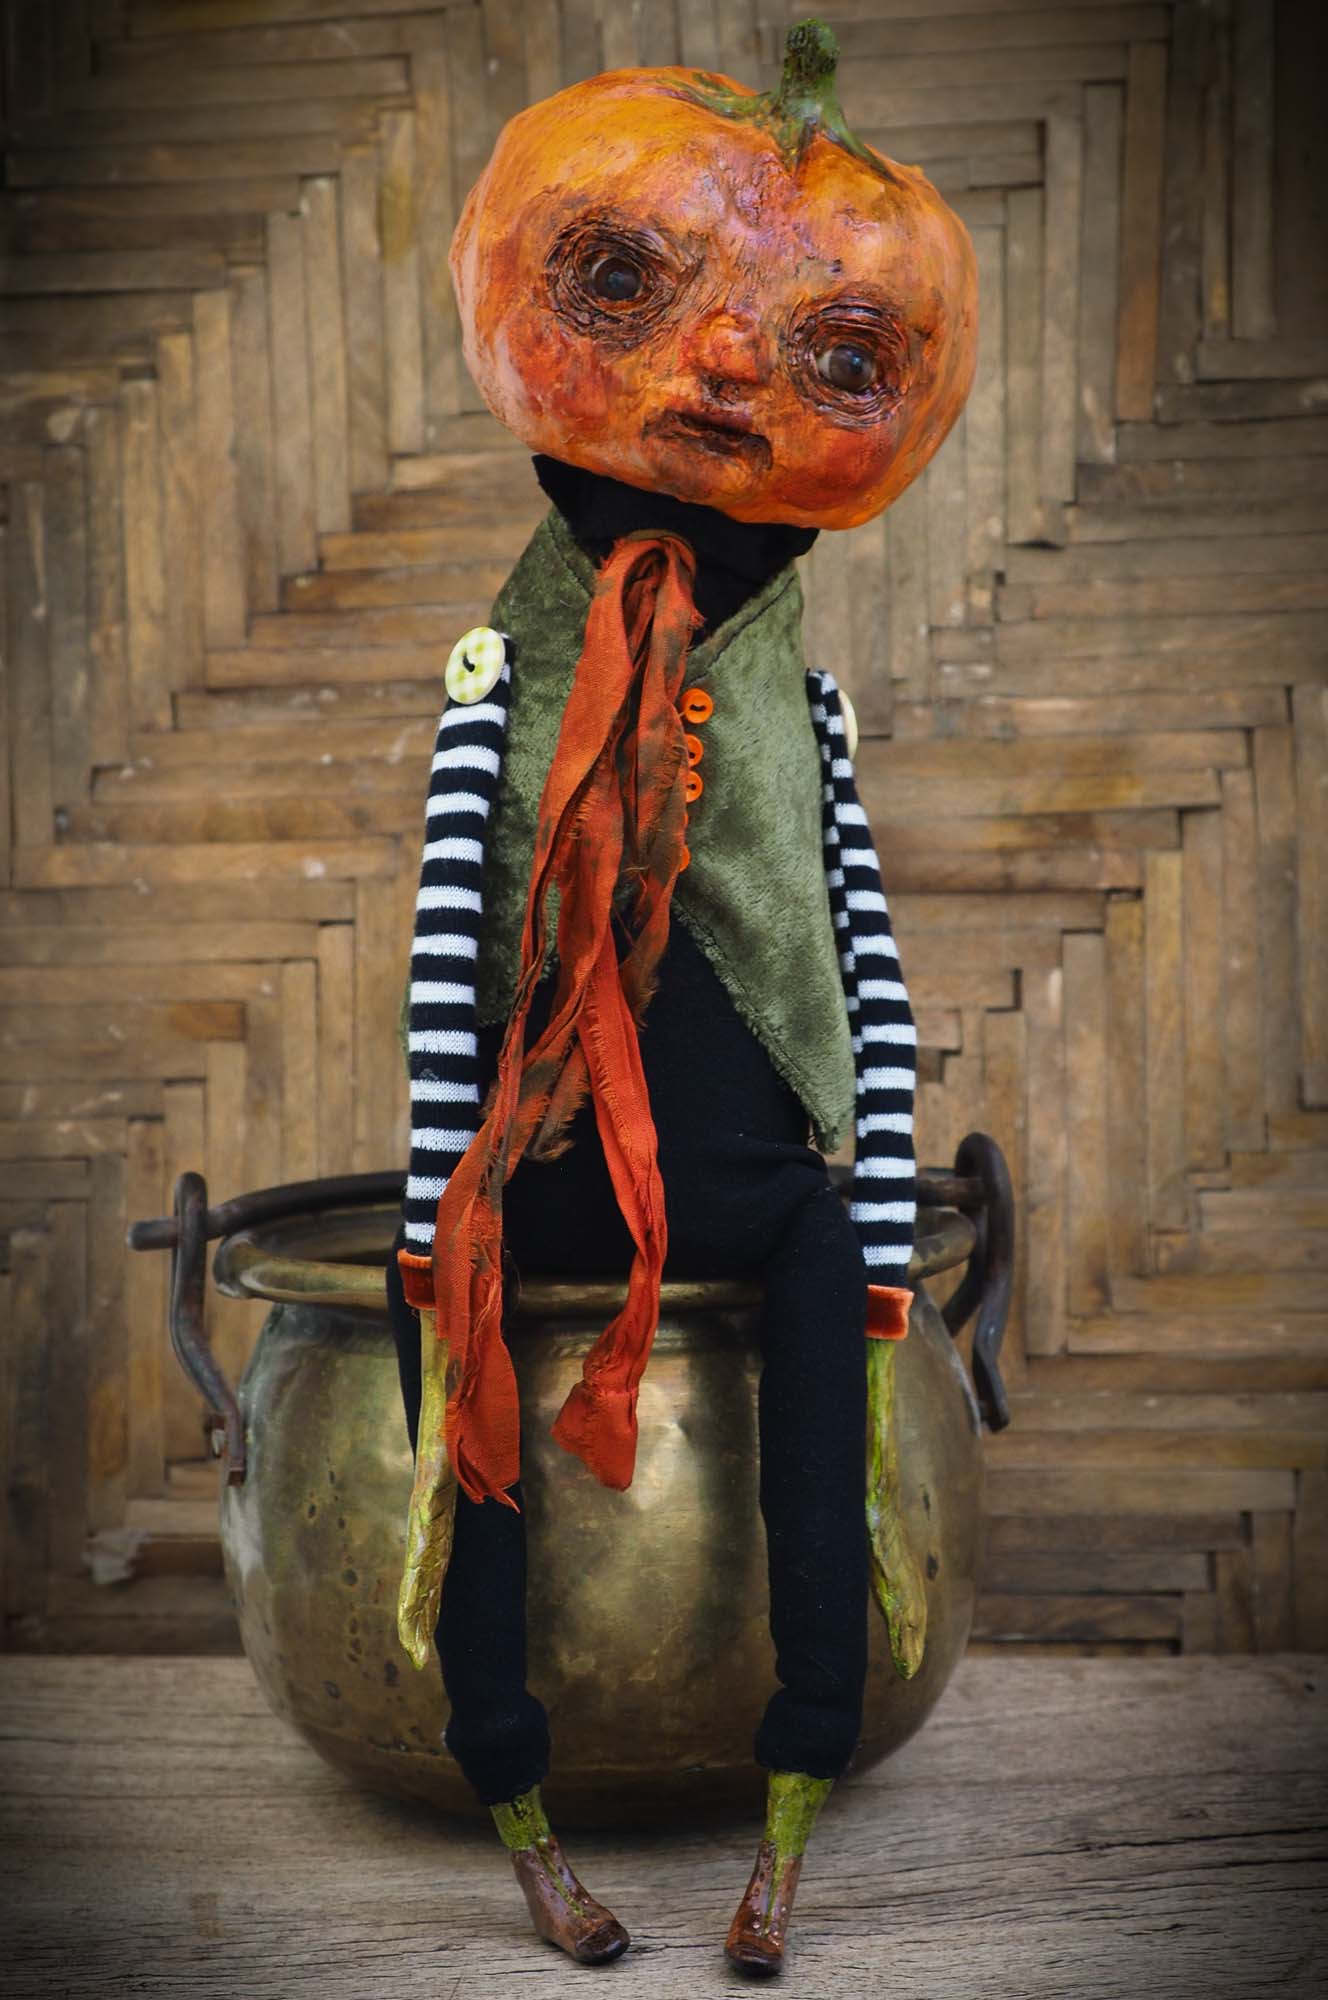 A witch transformed a boy into a Halloween pumpkin monster. This Danita original doll is a handmade jack-o-lantern soft sculpture as home decoration ornament. Carefully handmade with whimsical folk art roots, the spooky ghosts, witches, vampires, ghouls, and jack-o-lantern art dolls of Danita are full of mystery lore.